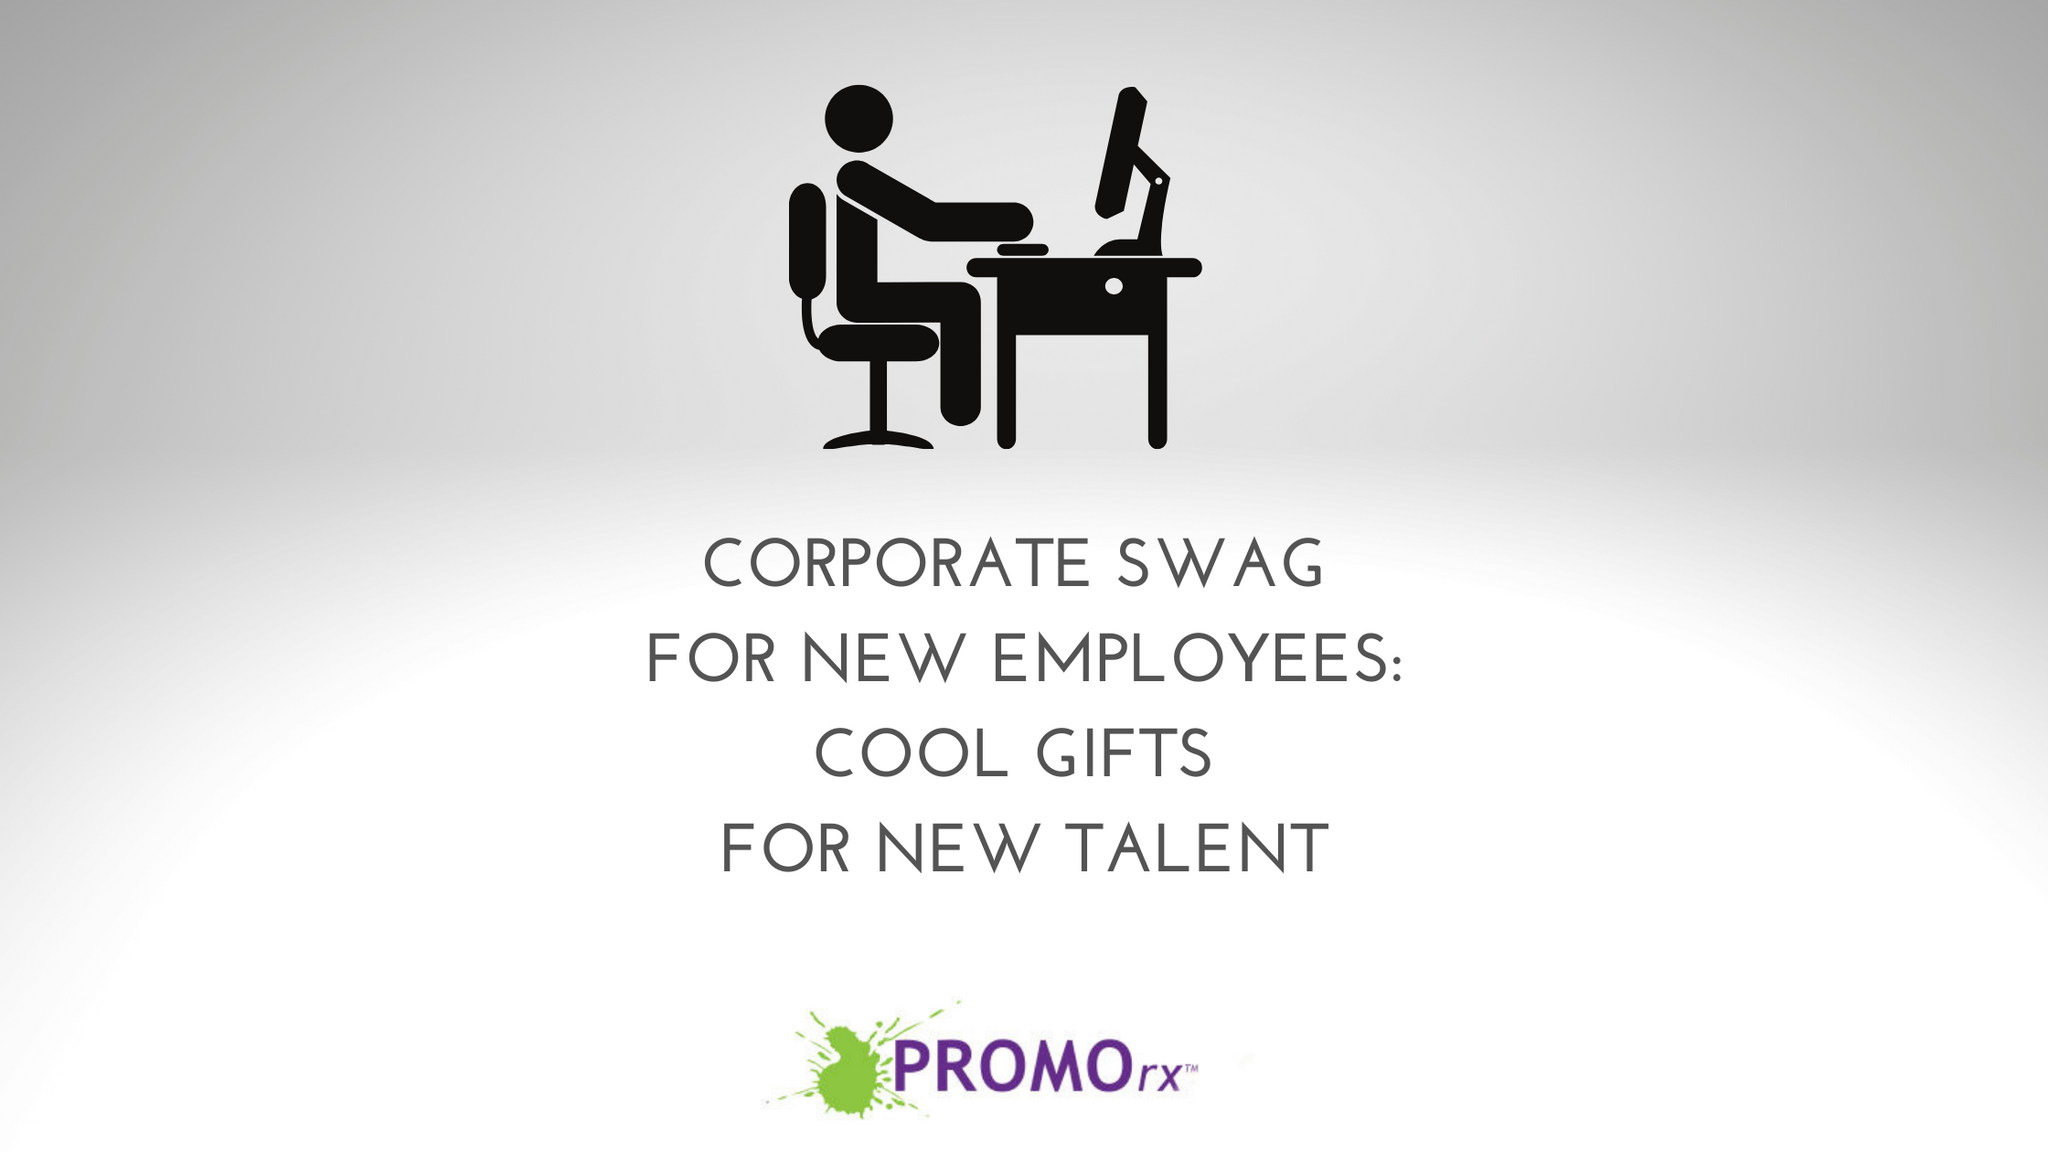 Corporate Swag for New Employees: Cool Gifts for New Talent